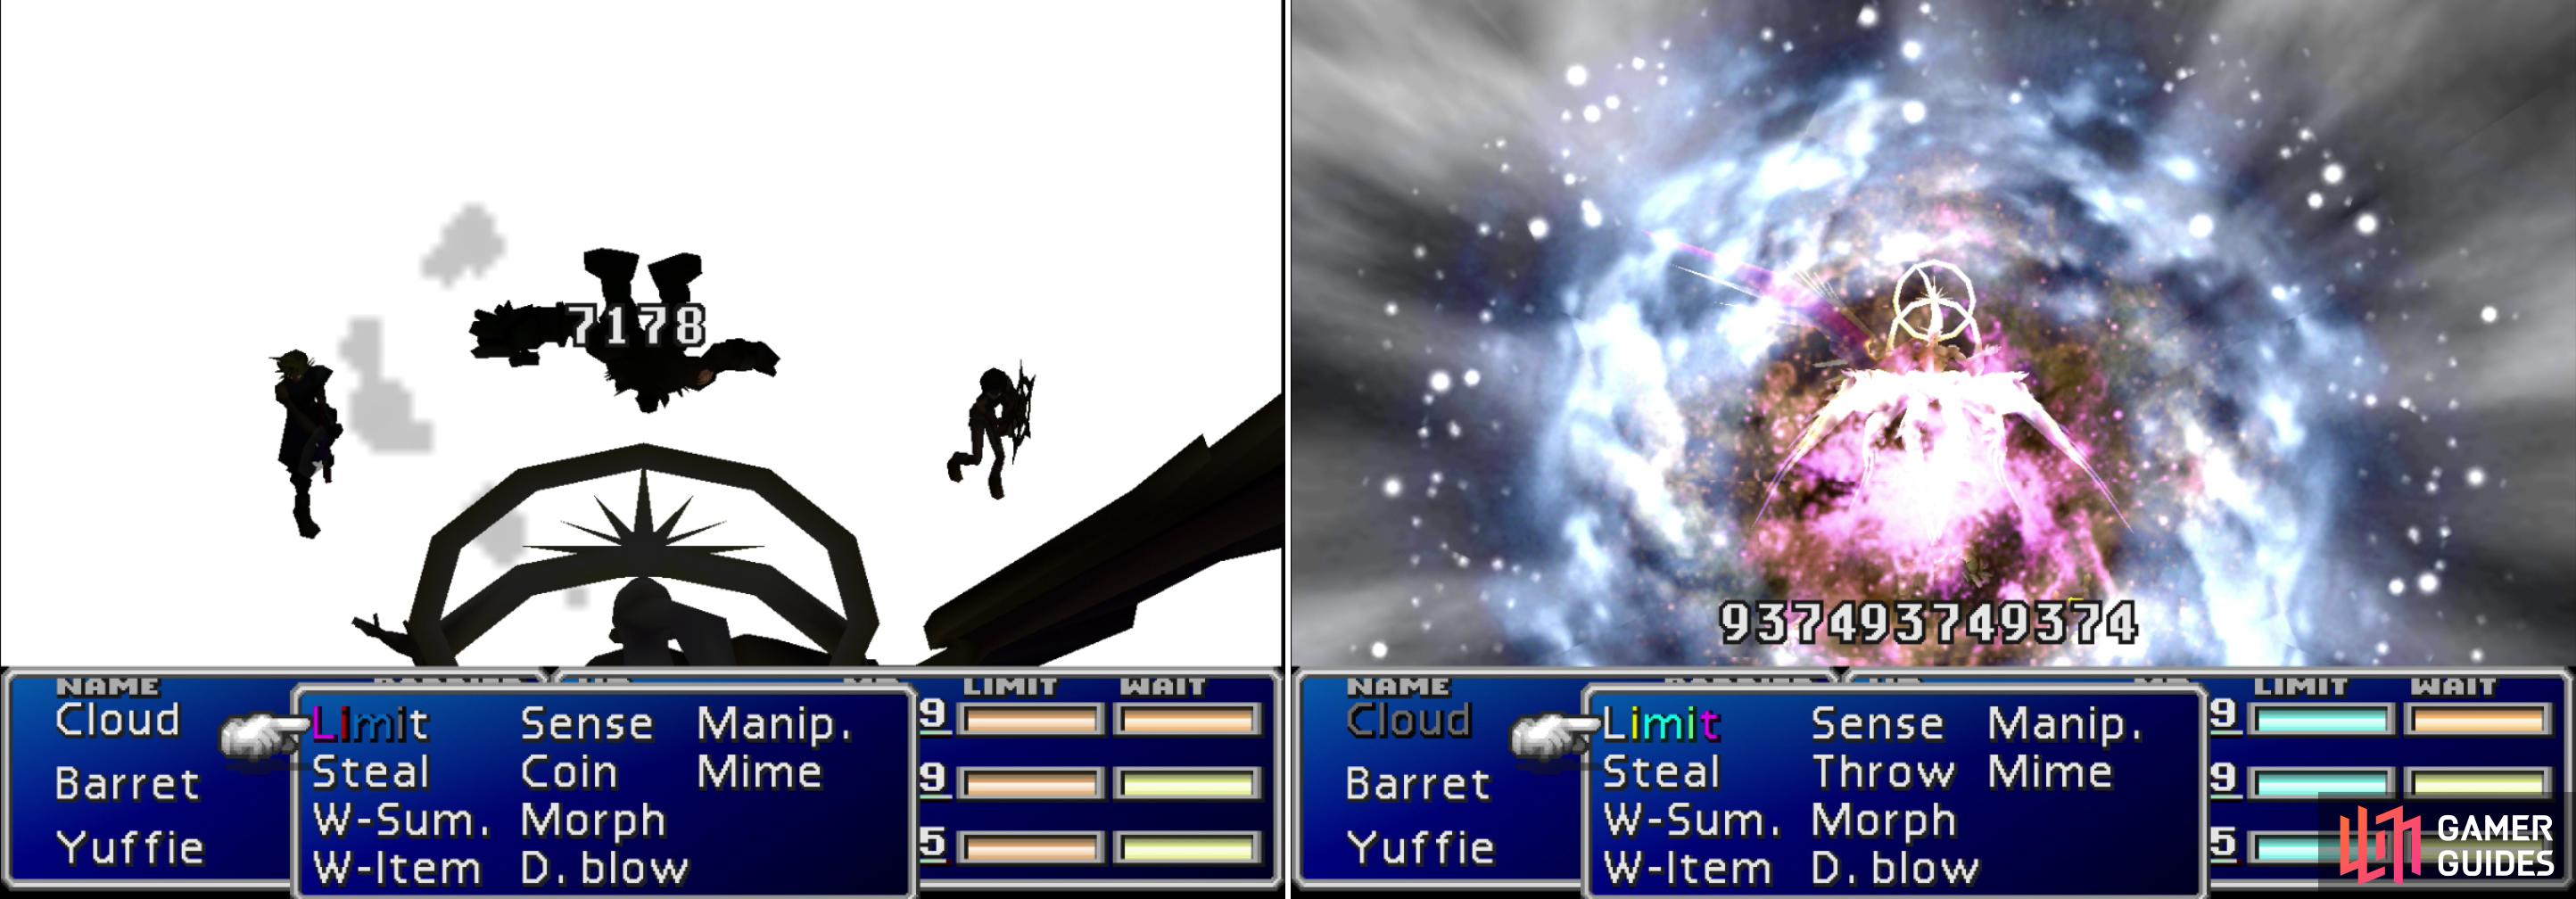 Safer Sephiroth's "Shadow Flare" attack can deal massive damage to one character (left). But his most danger - and absurdly elaborate - attack is "Super Nova", which inflicts a number of status effects and reduces all party members to 1/16th of their current HP (right).